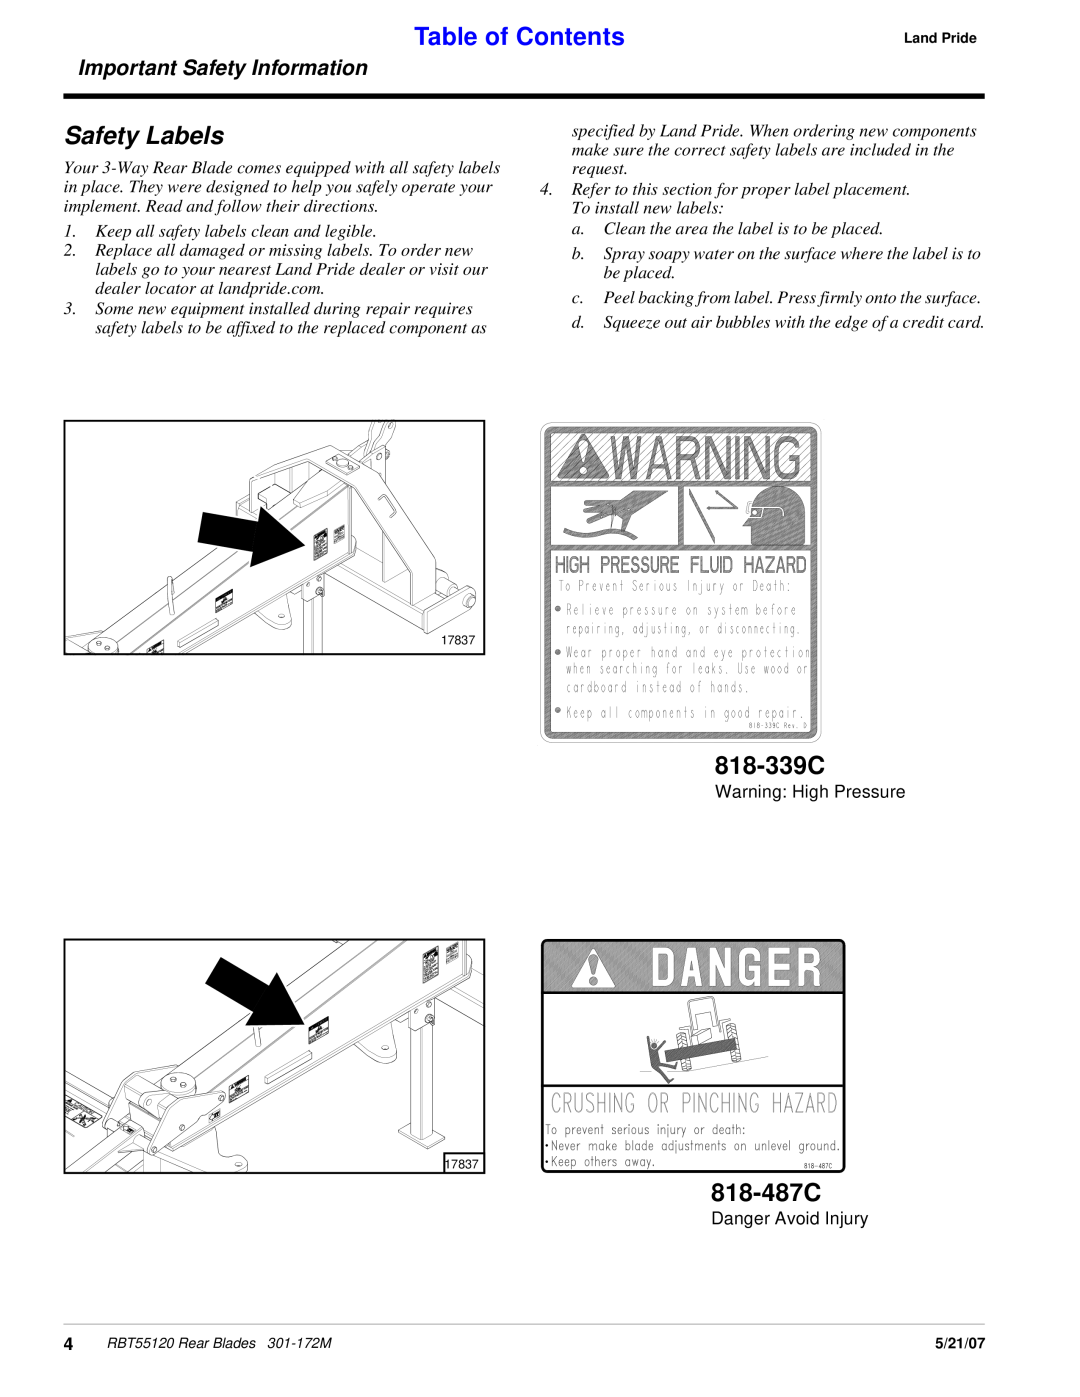 Land Pride RBT55120 manual Safety Labels, 818-339C, 818-487C, Table of Contents, Important Safety Information 